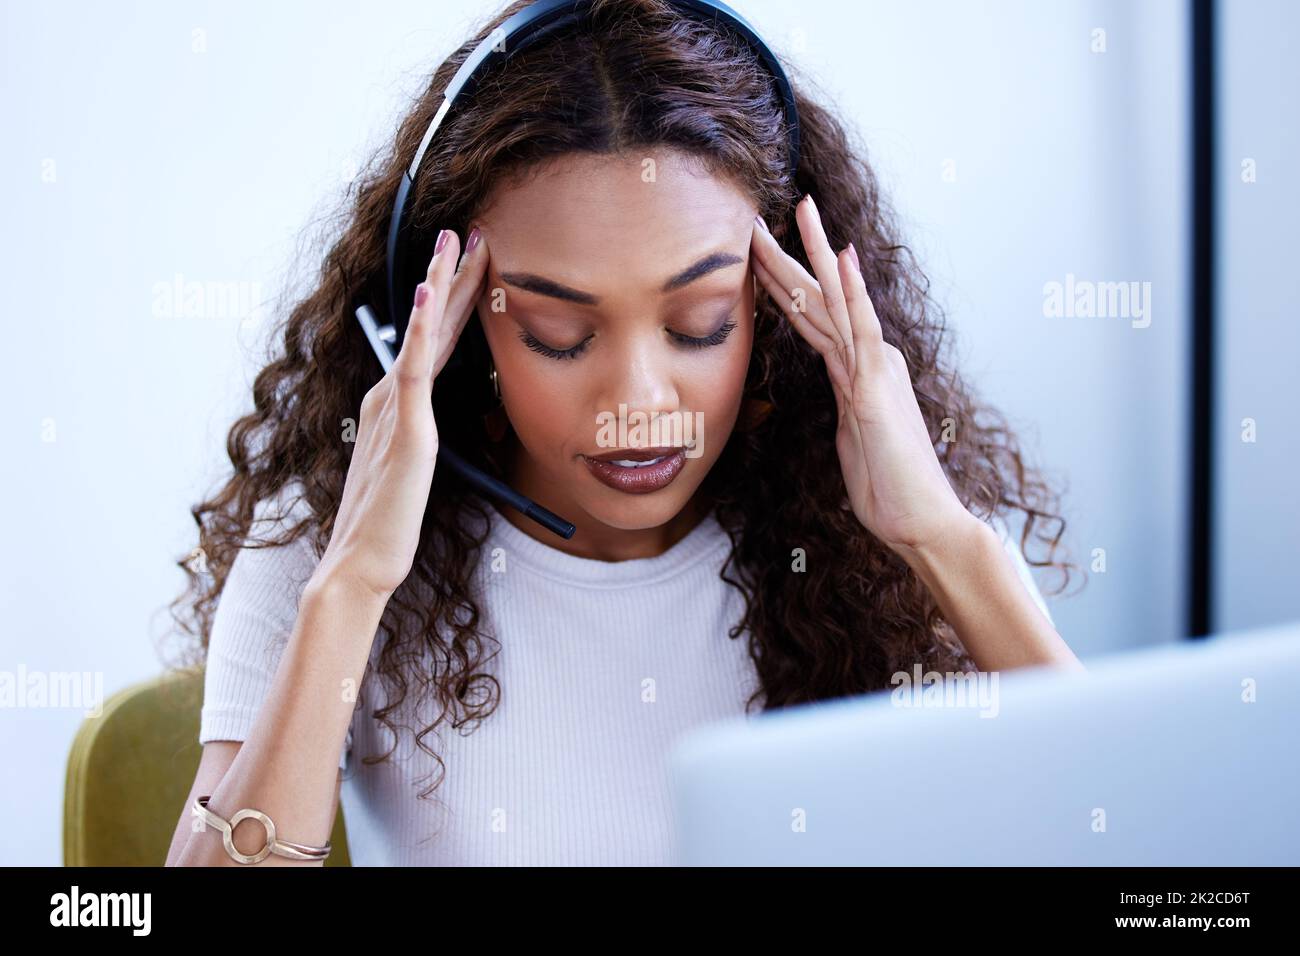 Its been an overwhelming day. Shot of a young call centre agent looking stressed out while working in an office. Stock Photo